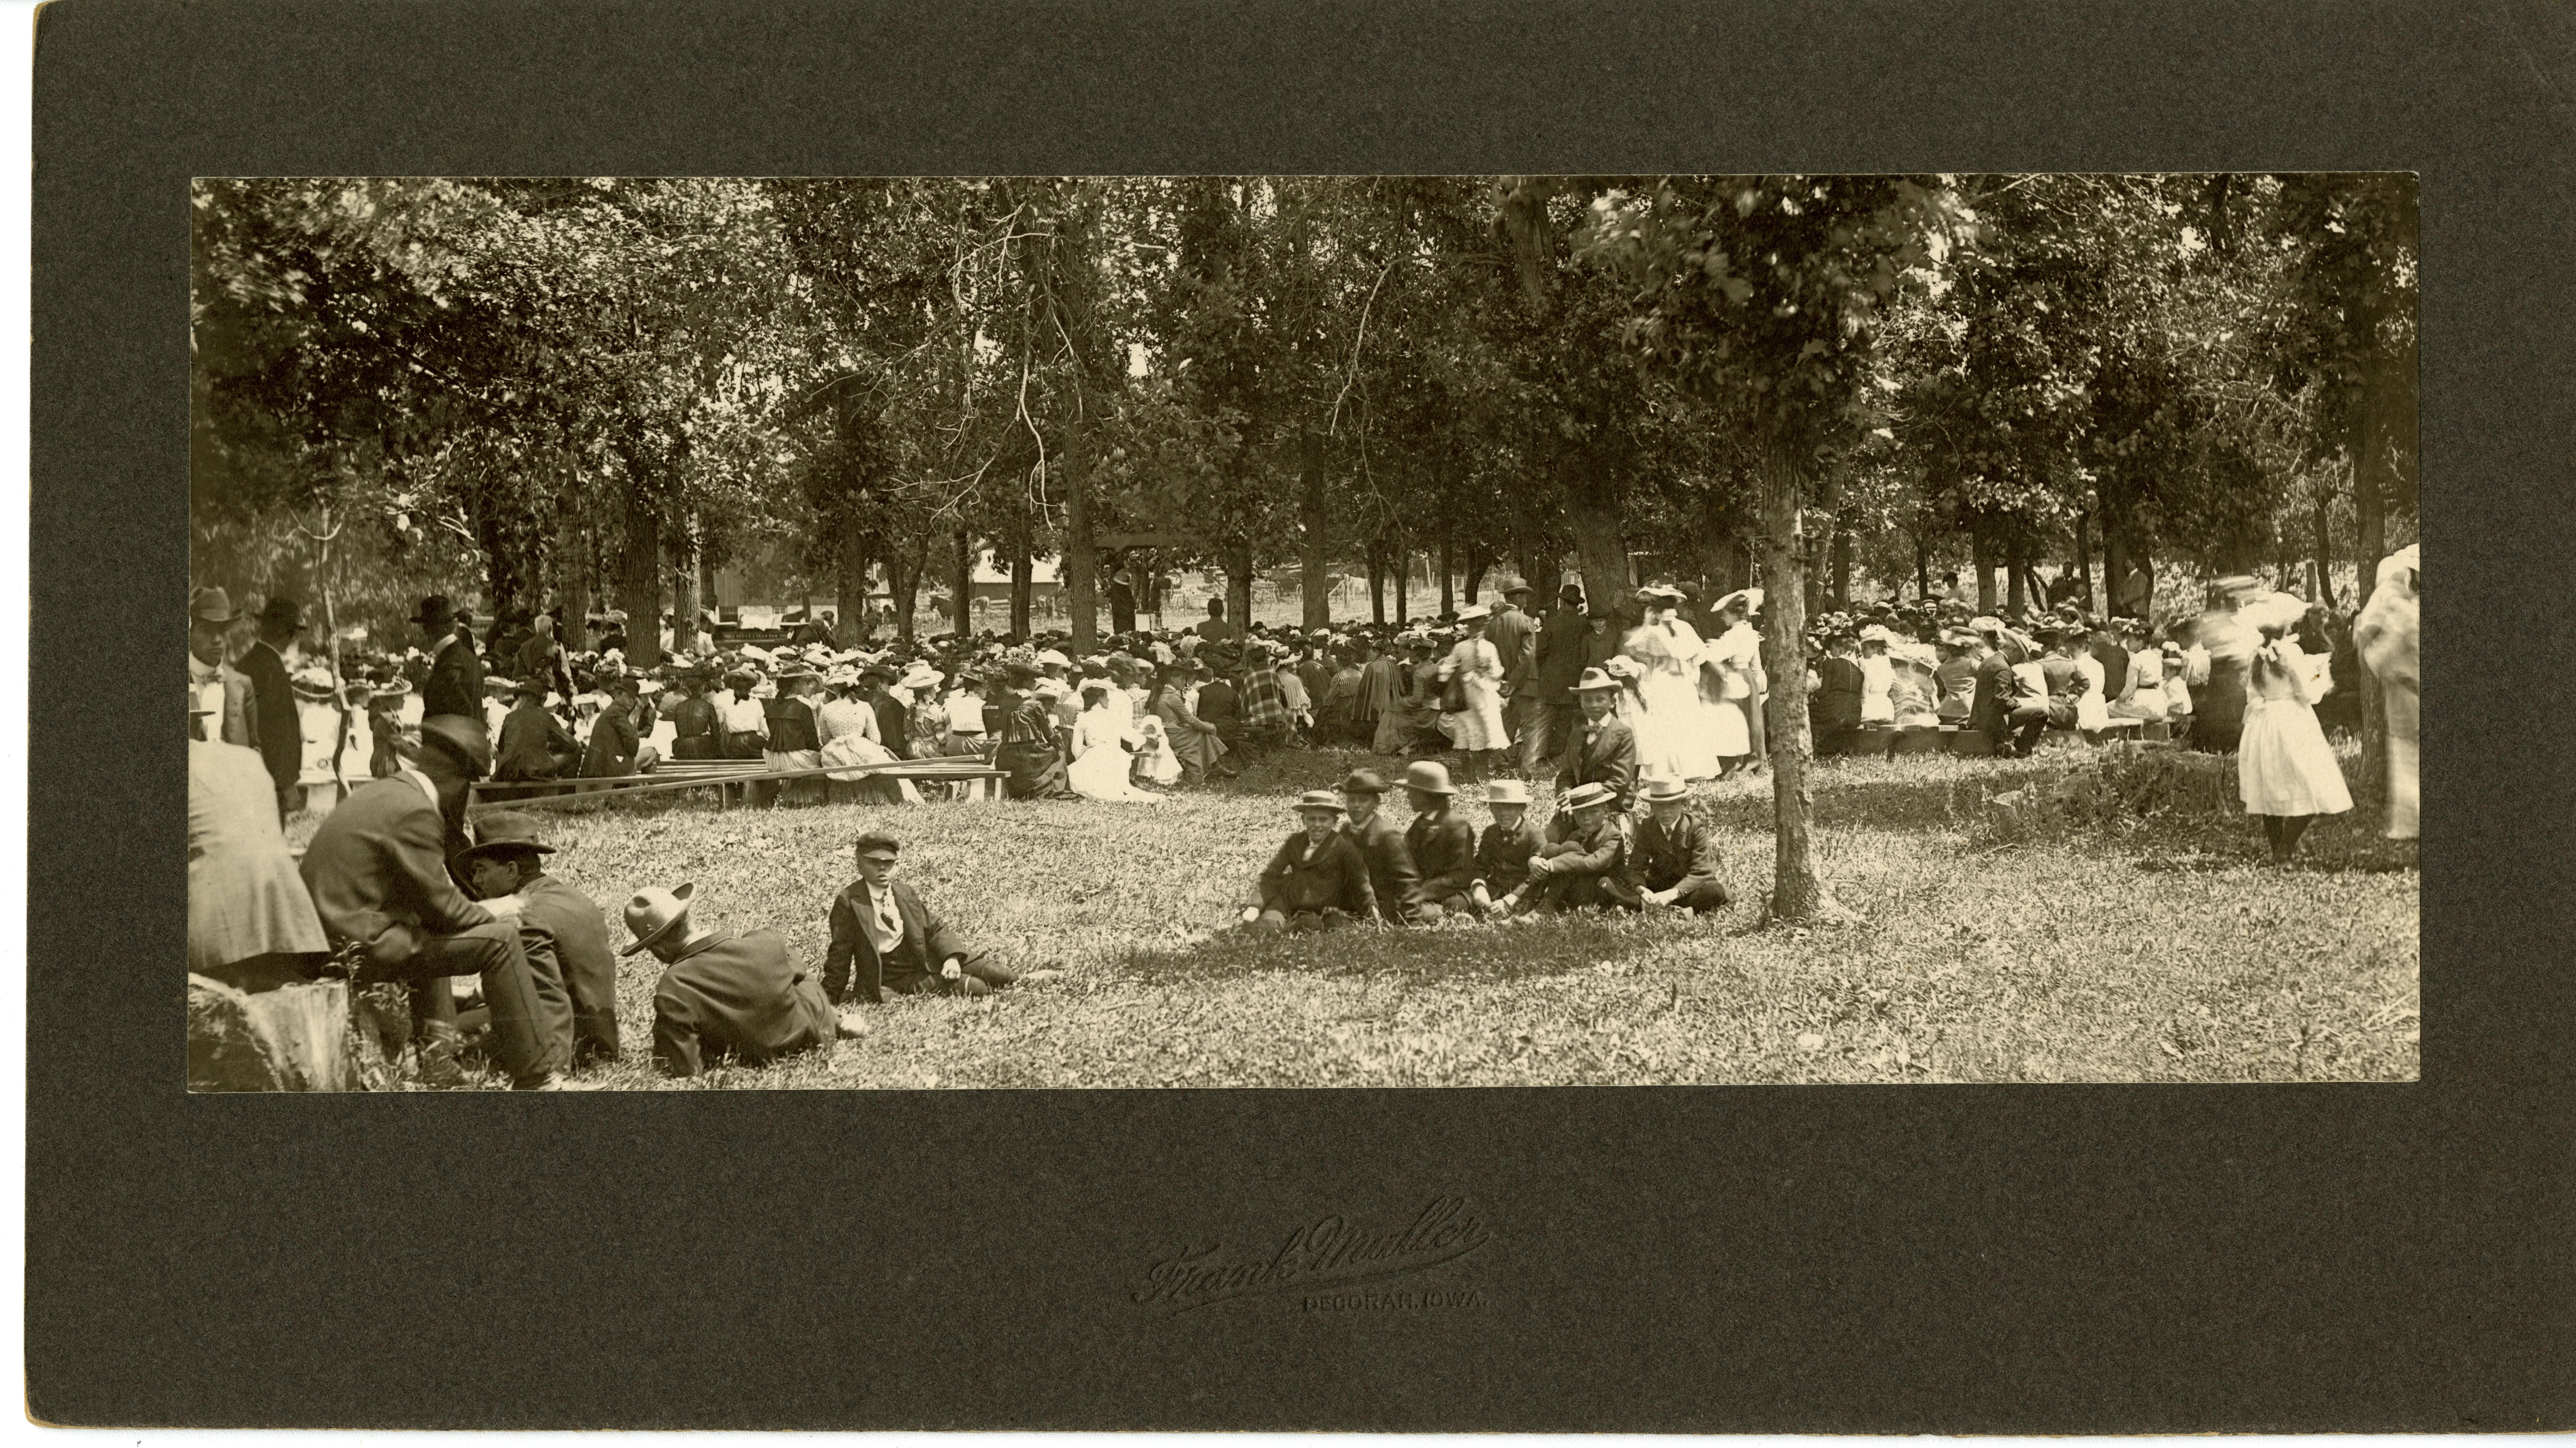 Large gathering of men, women, and children outside, possibly for church service.